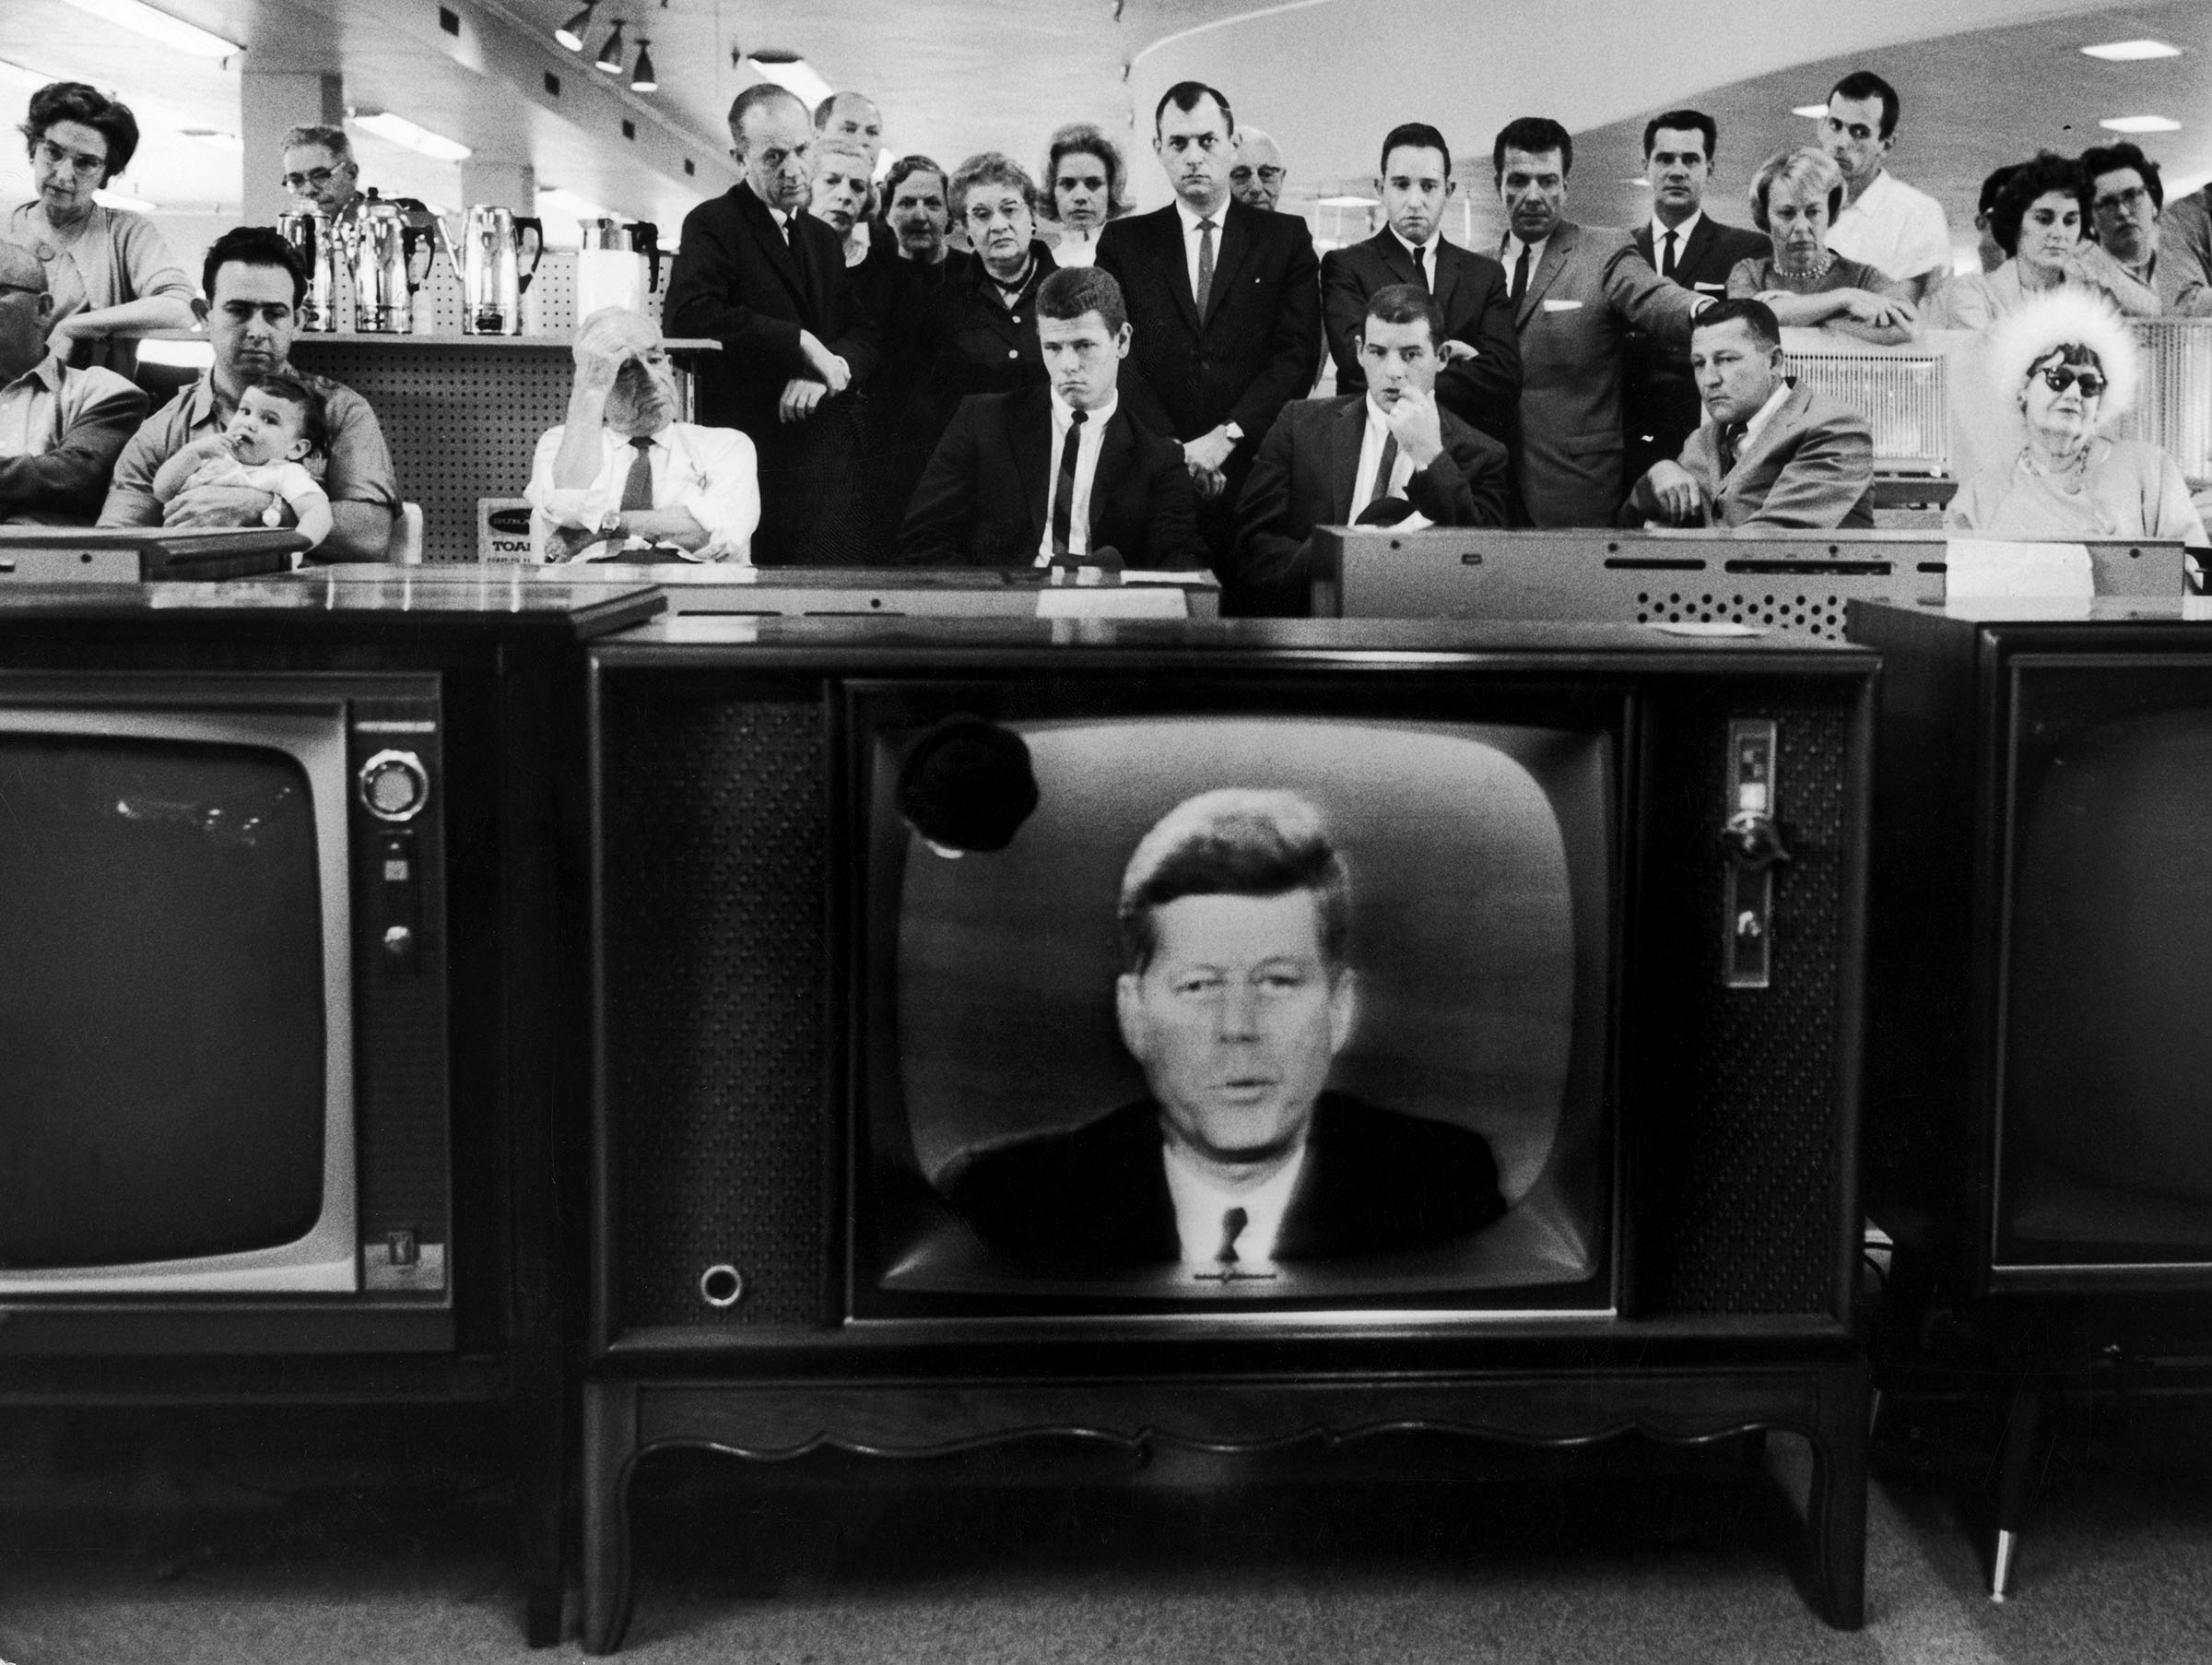 People watching President John F. Kennedy's TV announcement of Cuban blockade during the missile crisis in a department store in California on Oct.22, 1962.